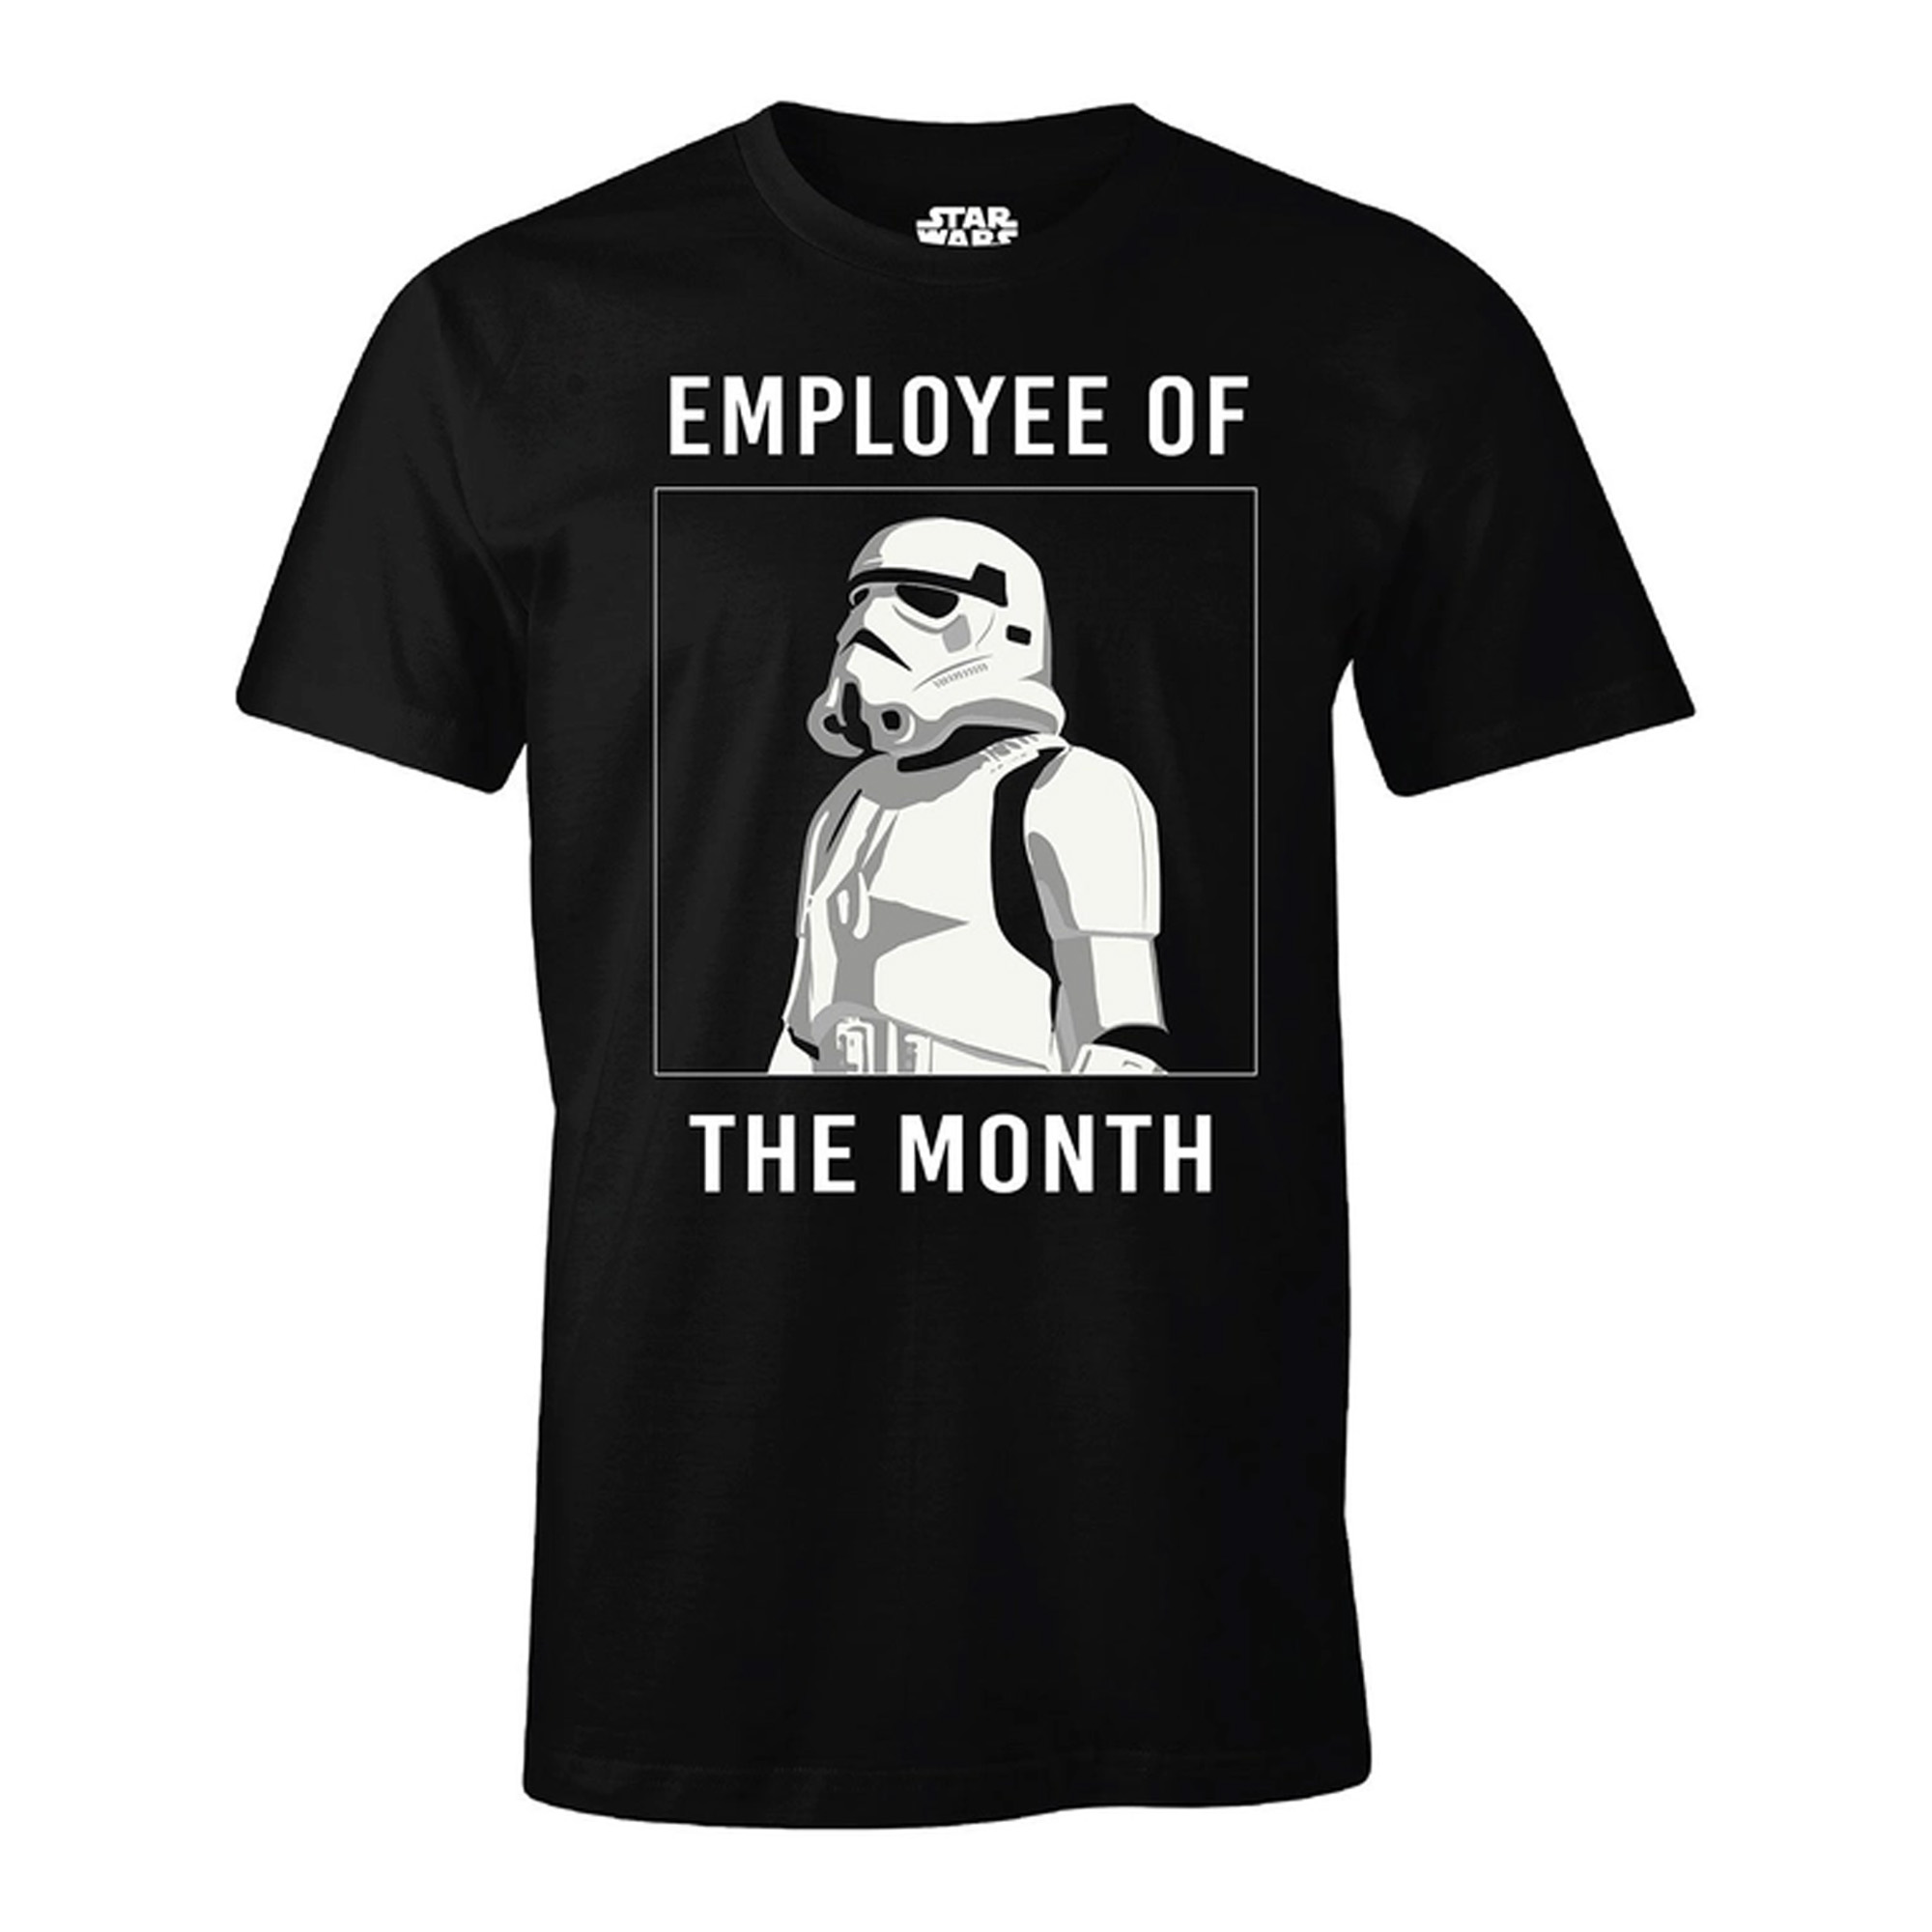 Employee of the Month T-Shirt - Star Wars